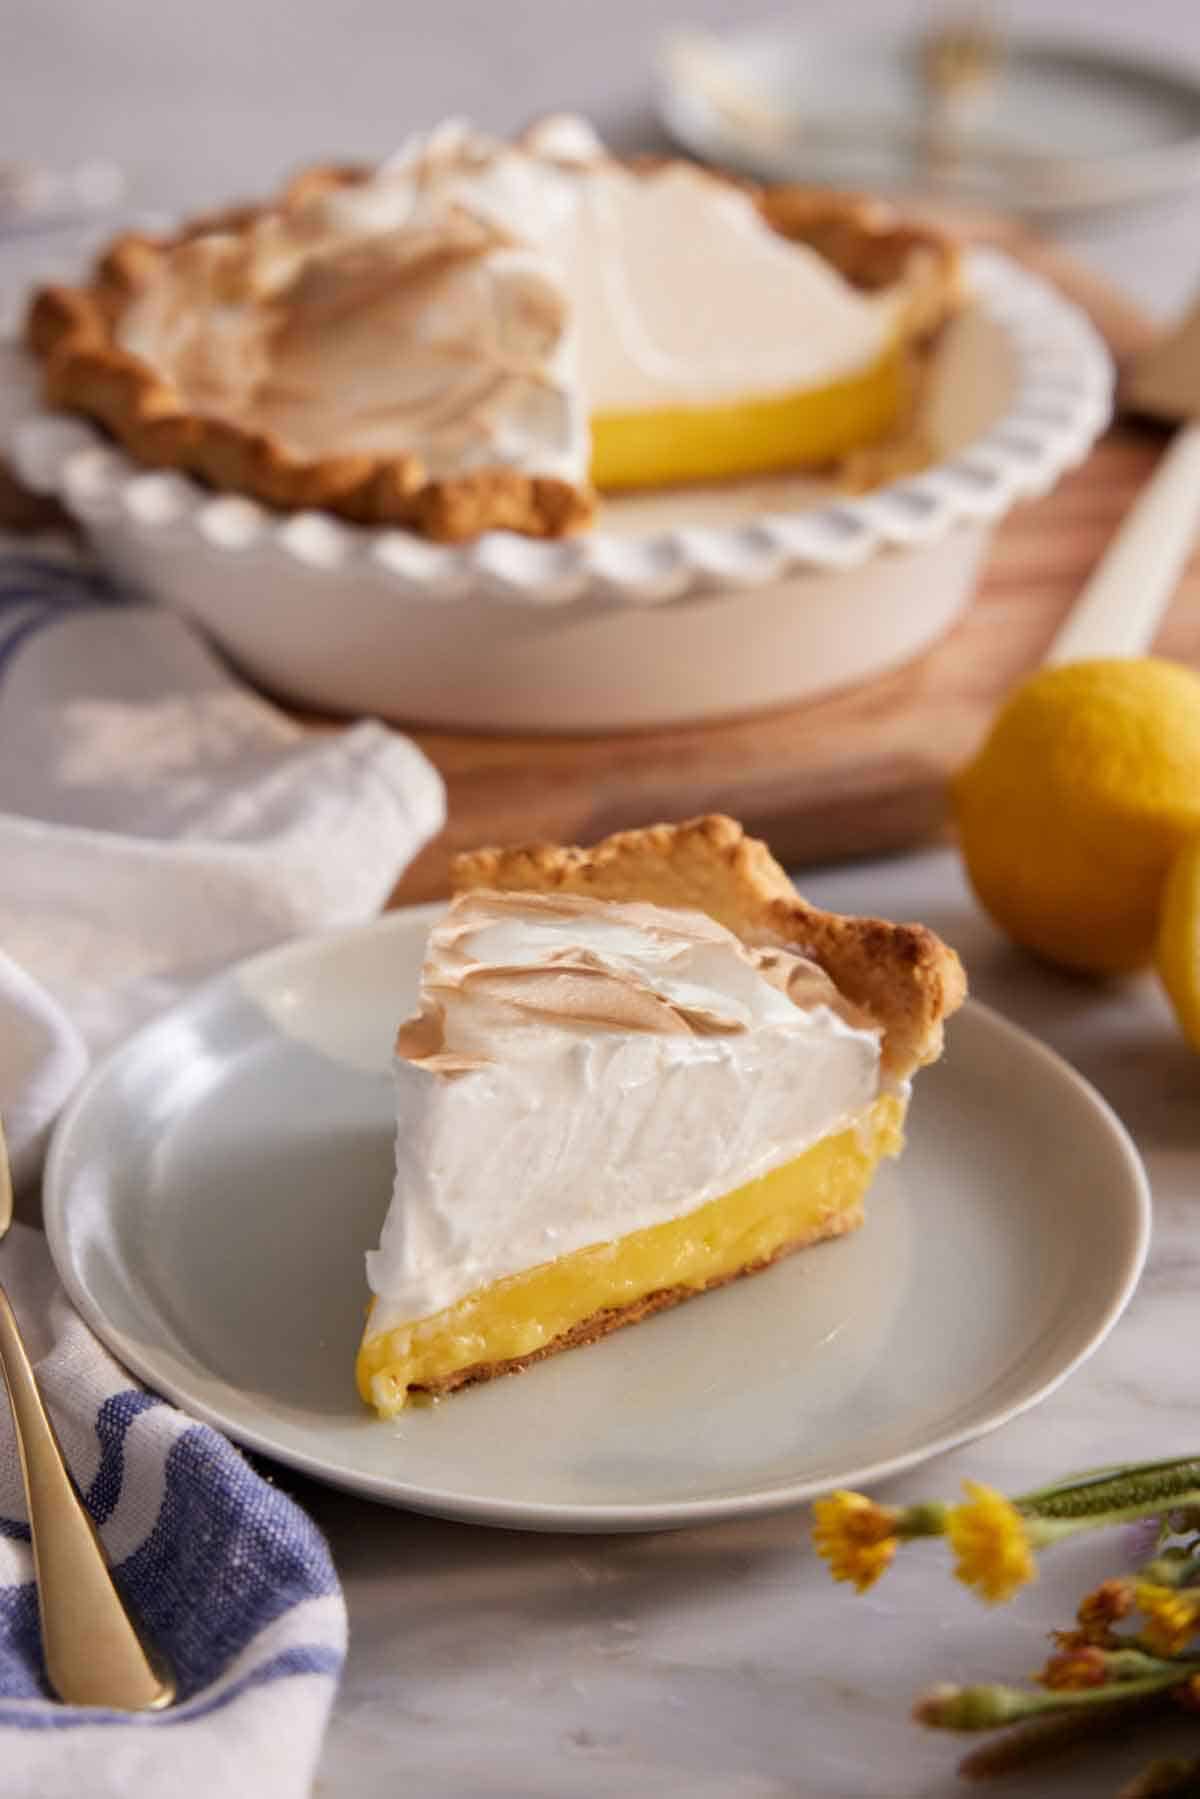 A slice of lemon meringue pie on a plate with the rest of the pie in the background.